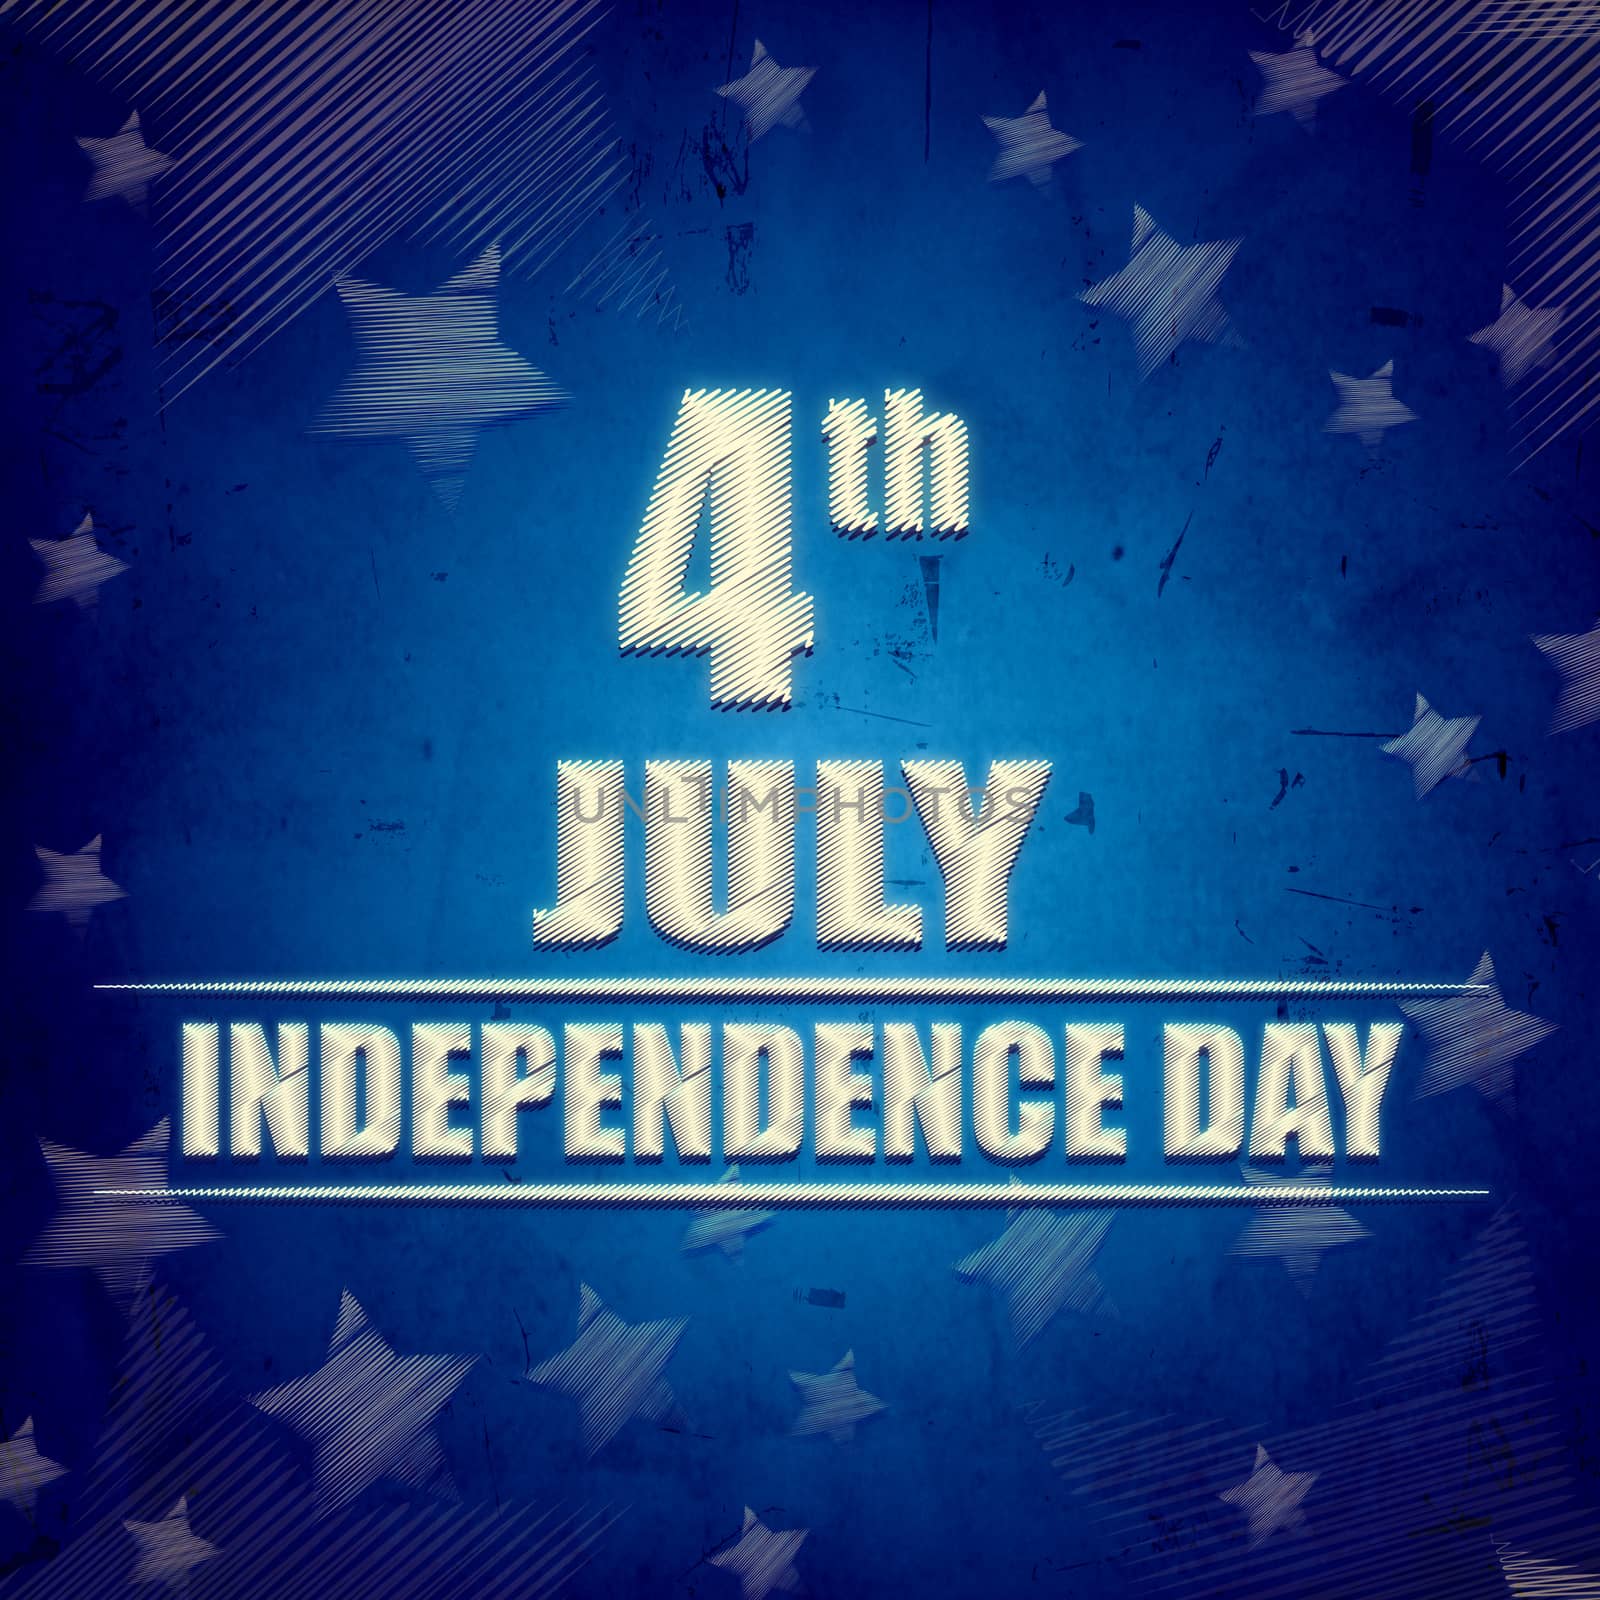 4th of July - American Independence Day - retro style banner with text and striped stars over blue old paper, usa holiday concept